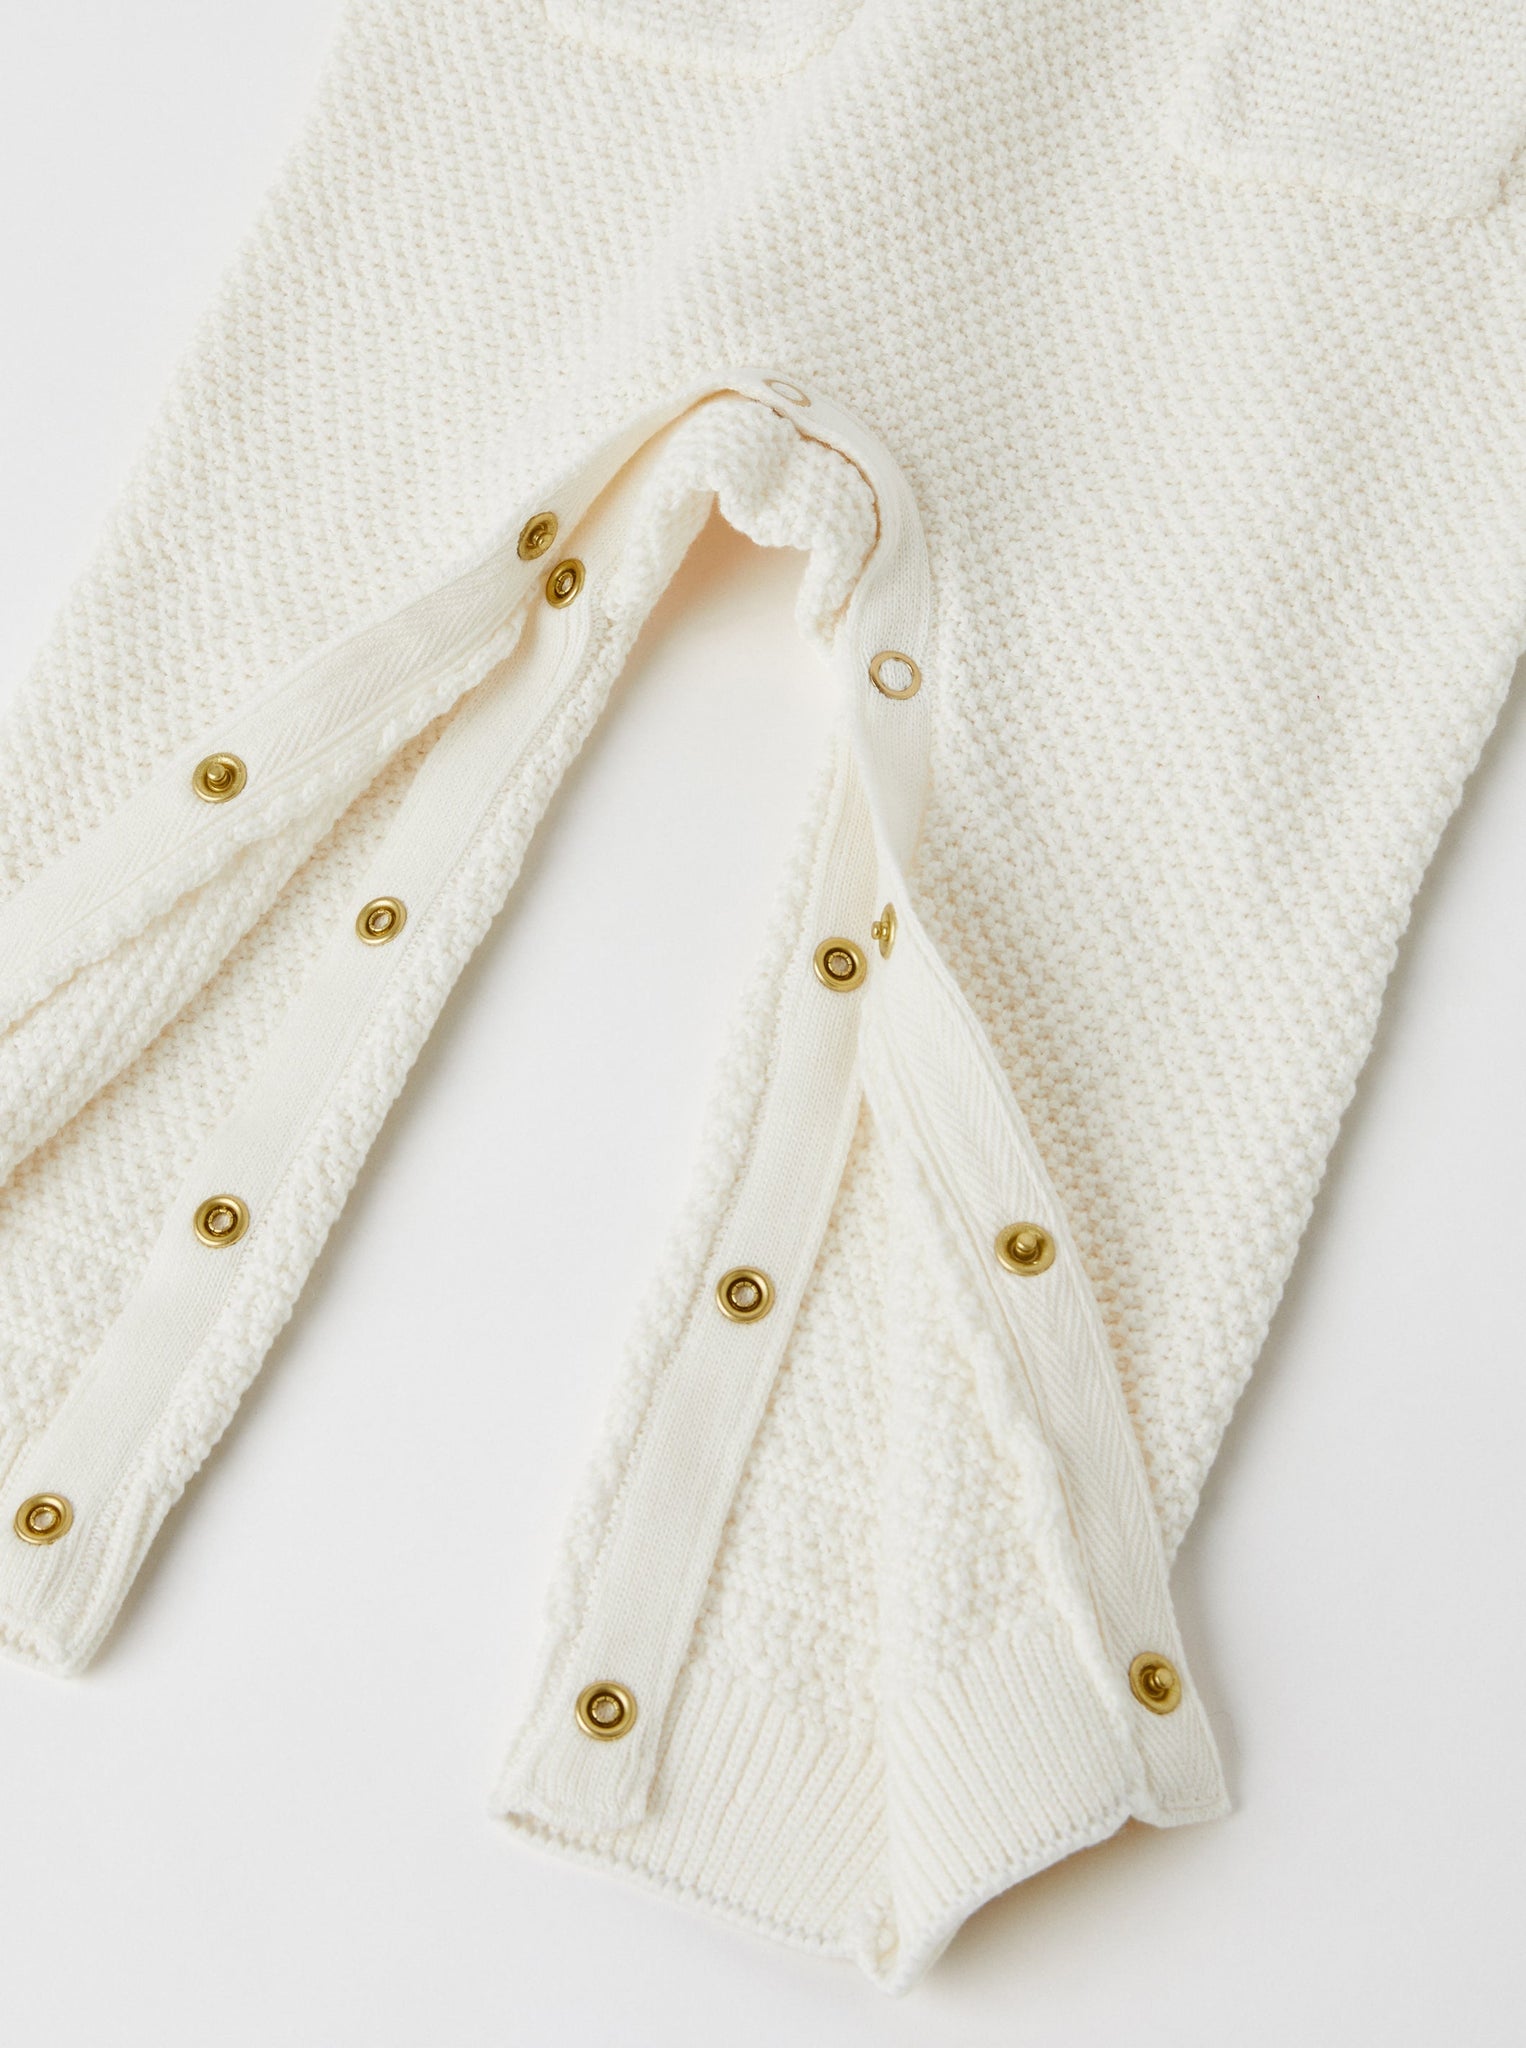 Organic Cotton White Baby Dungarees from the Polarn O. Pyret babywear collection. Ethically produced kids clothing.